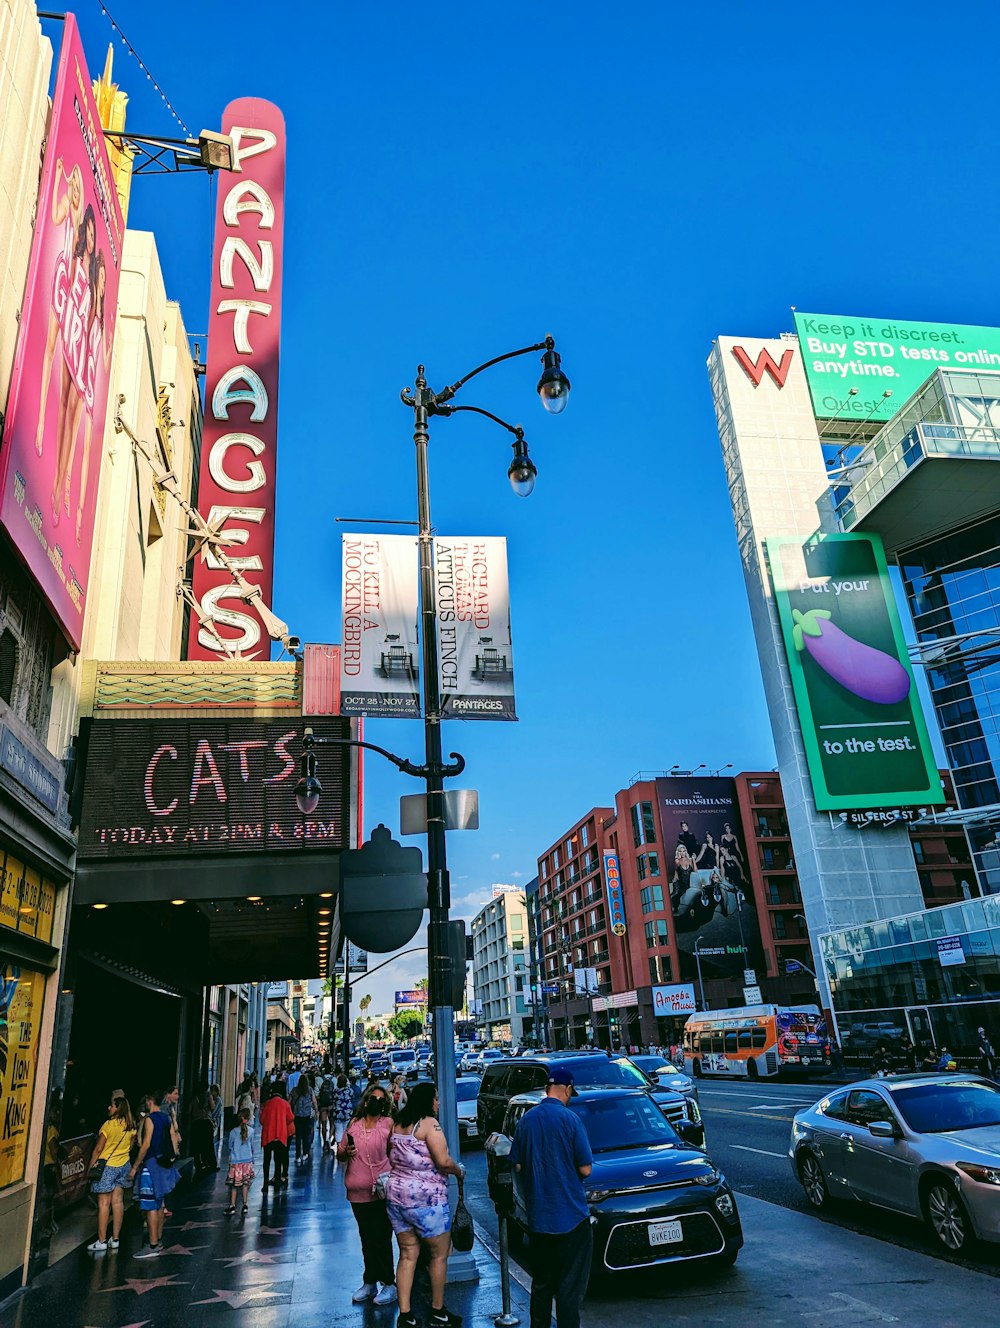 CATS at the Pantages Theatre, Hollywood, CA